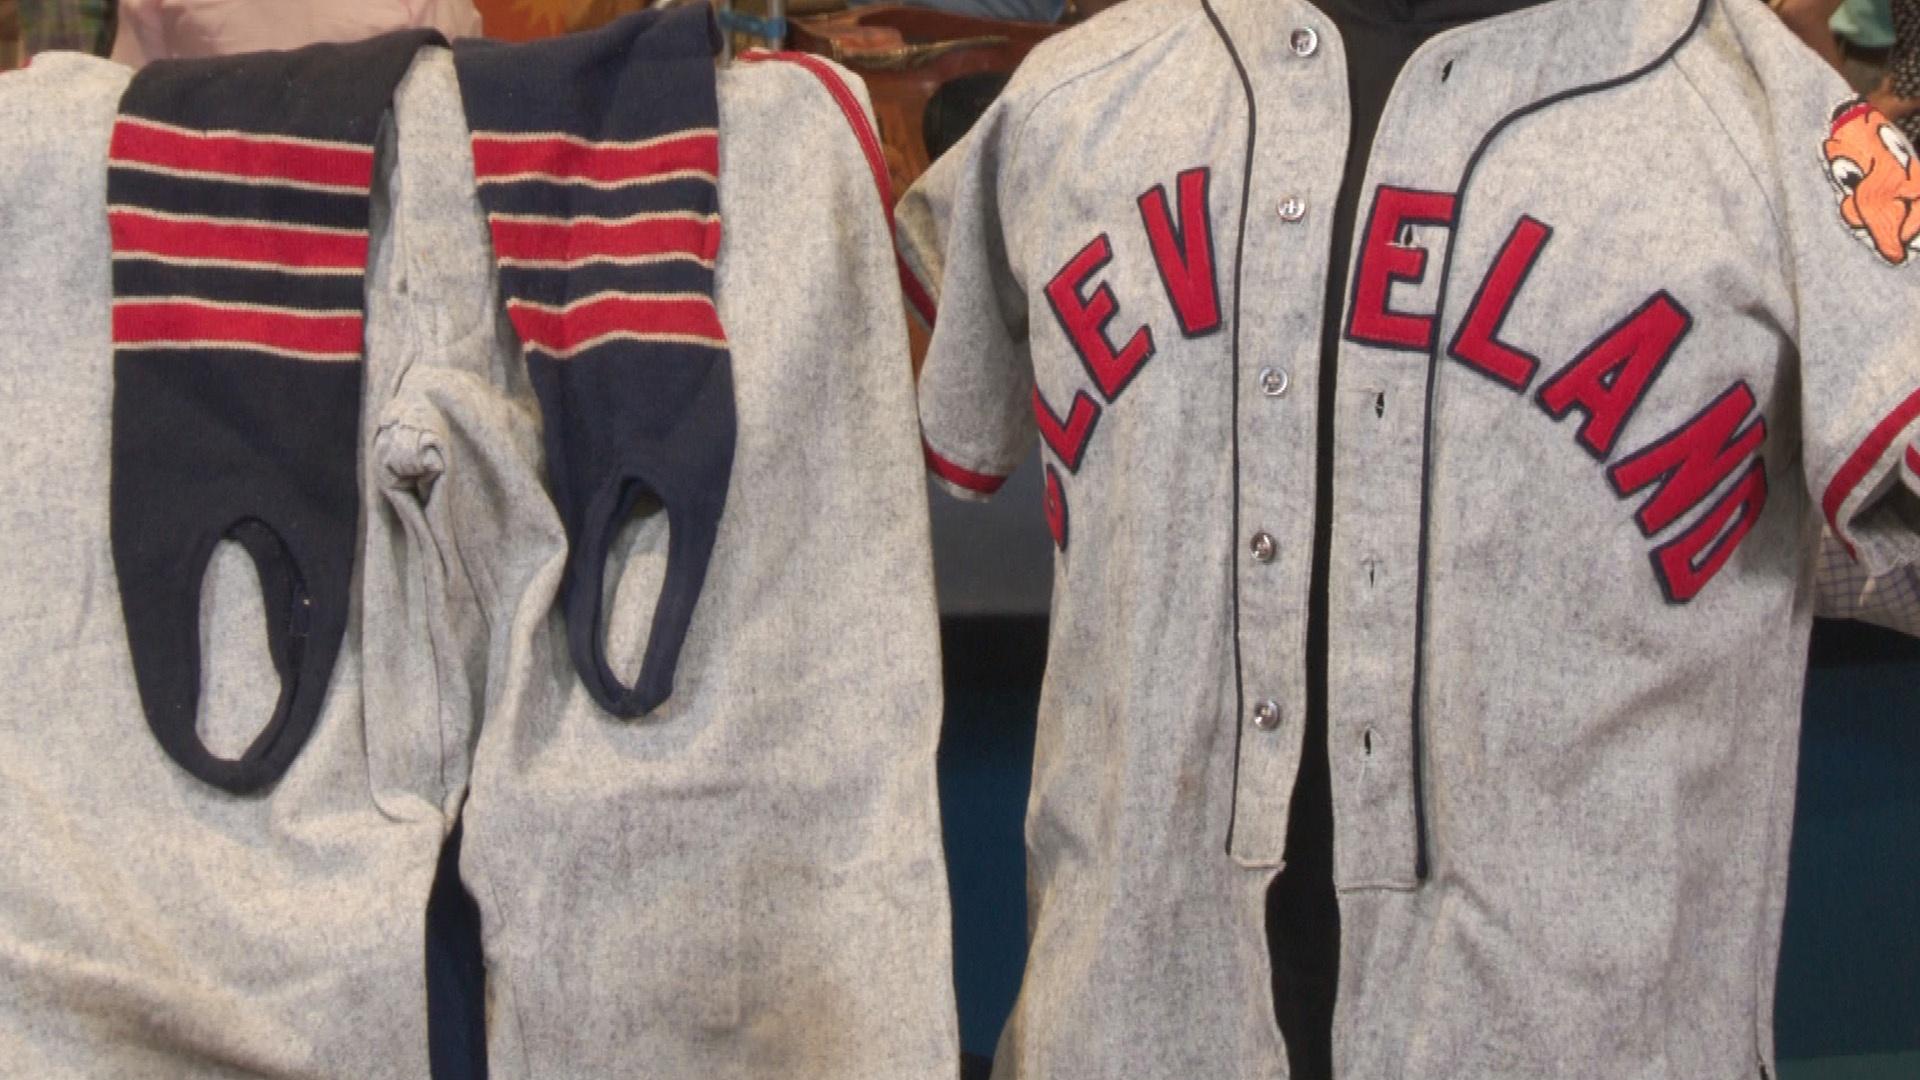 1948 cleveland indians jersey